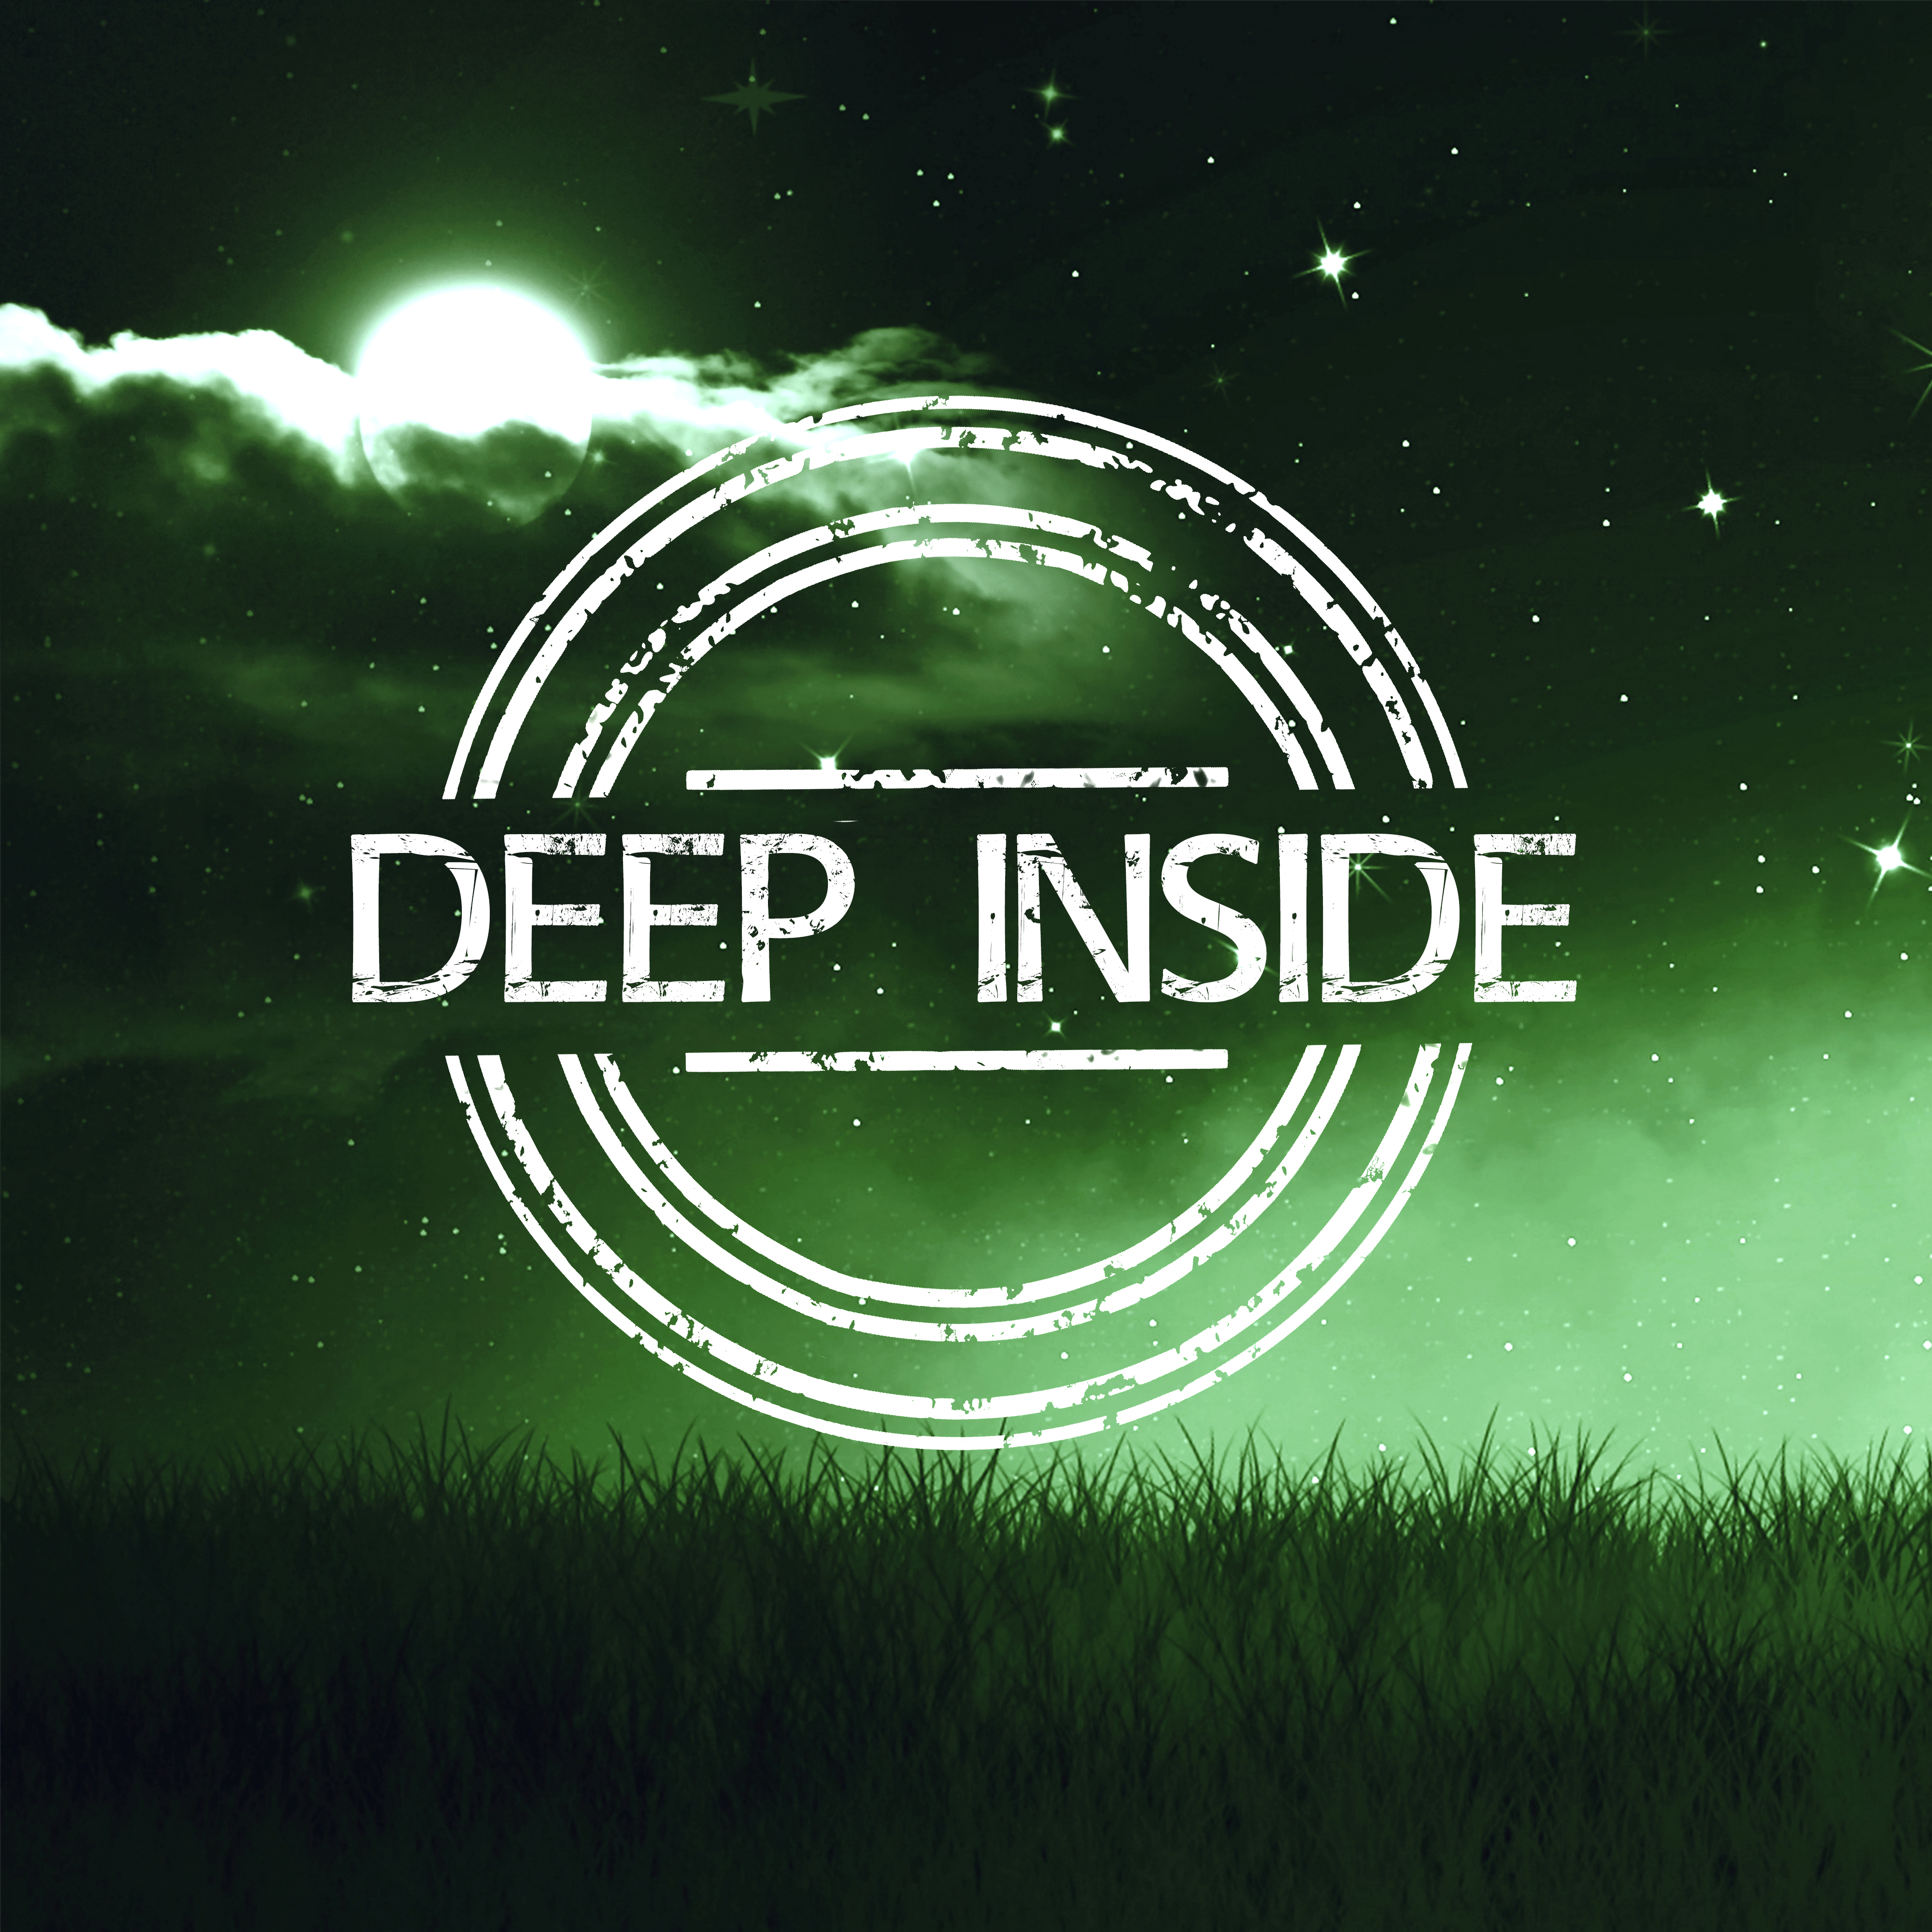 Deep Inside - Restful Sleep Relieving Insomnia, Sleep Music to Help You Relax all Night, Serenity Lullabies with Relaxing Nature Sounds, Healing Massage, New Age, Deep Sleep Music